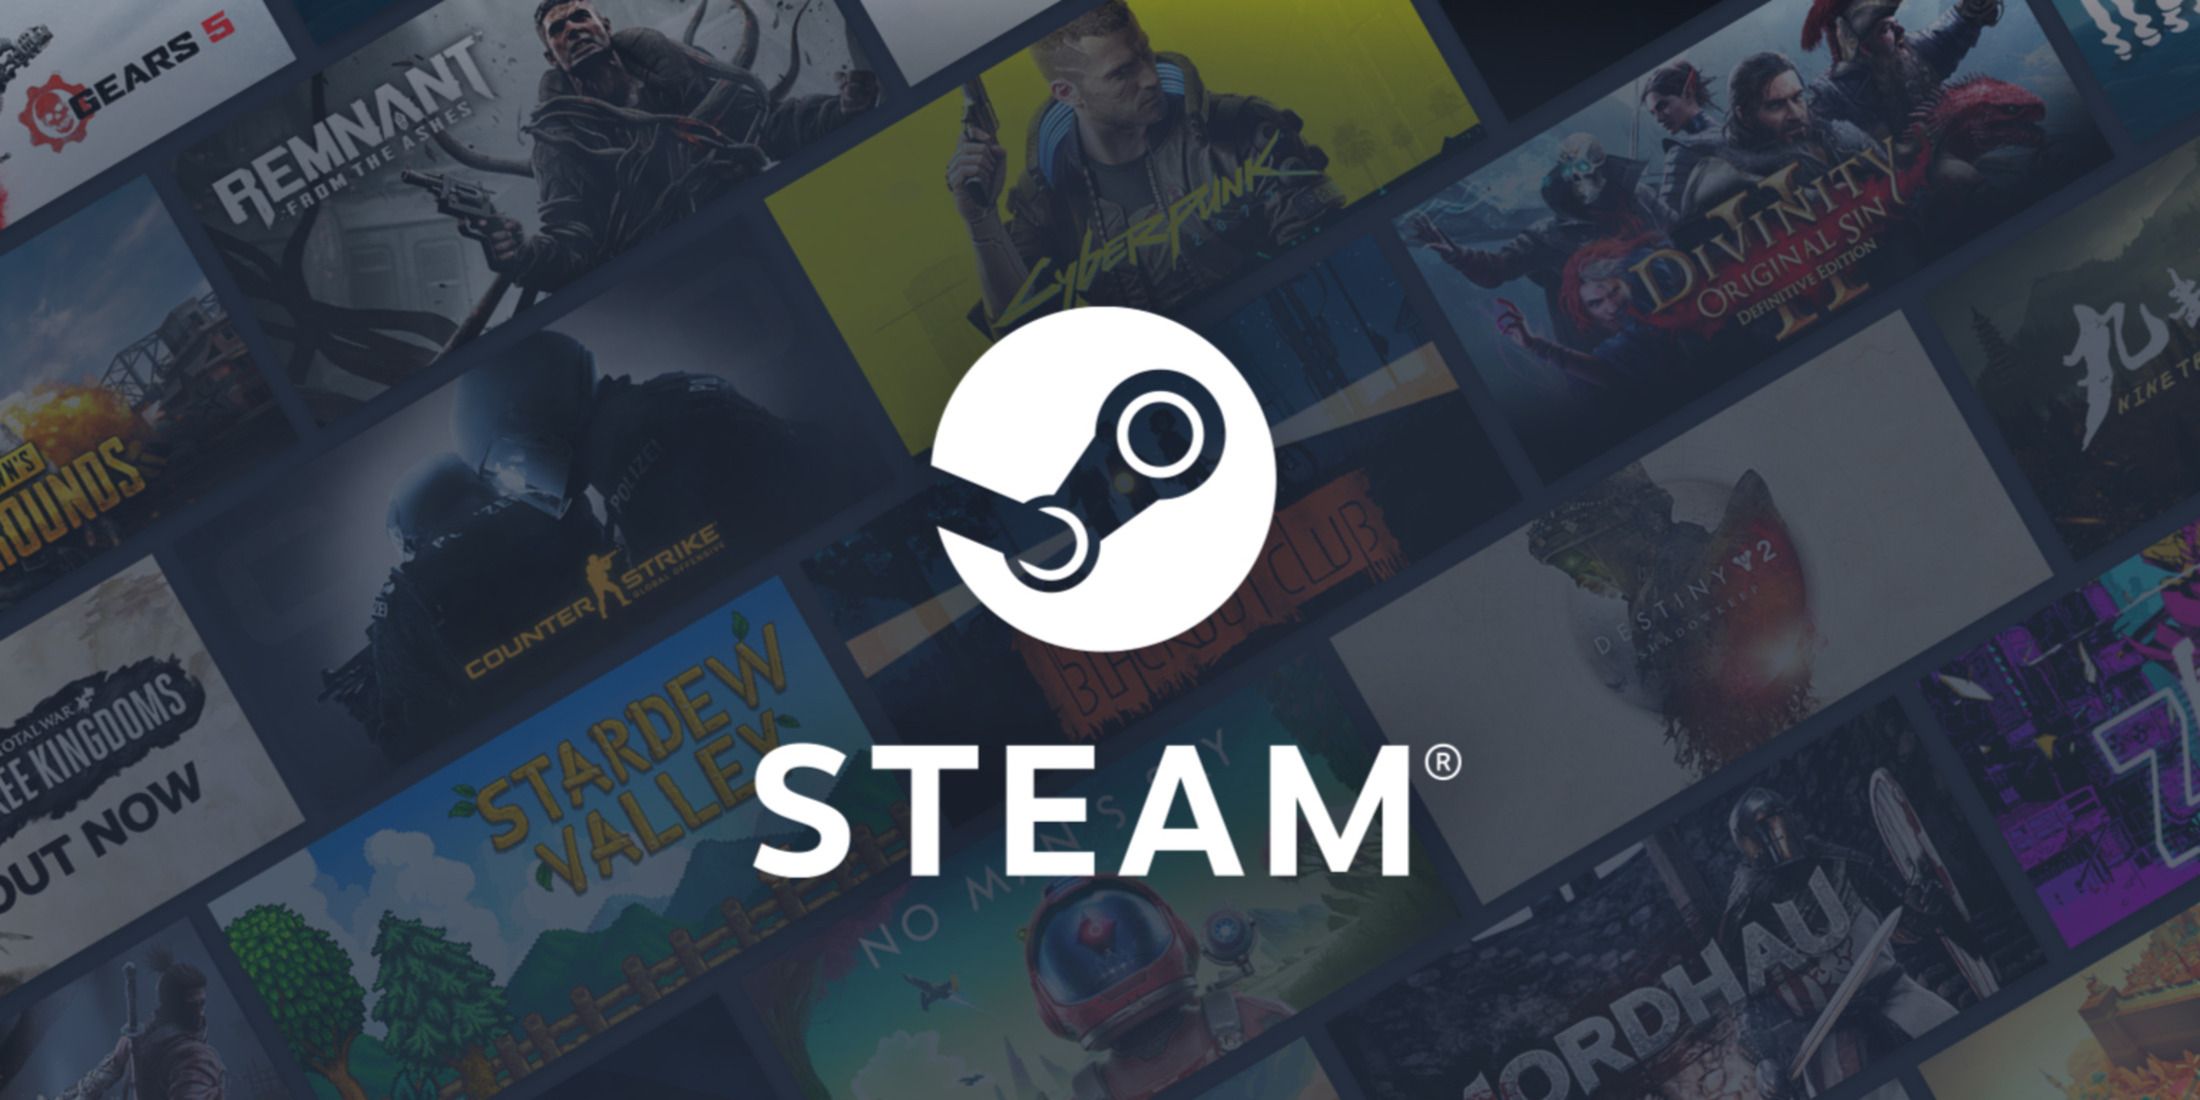 Steam Reveals Information About Controller Usage